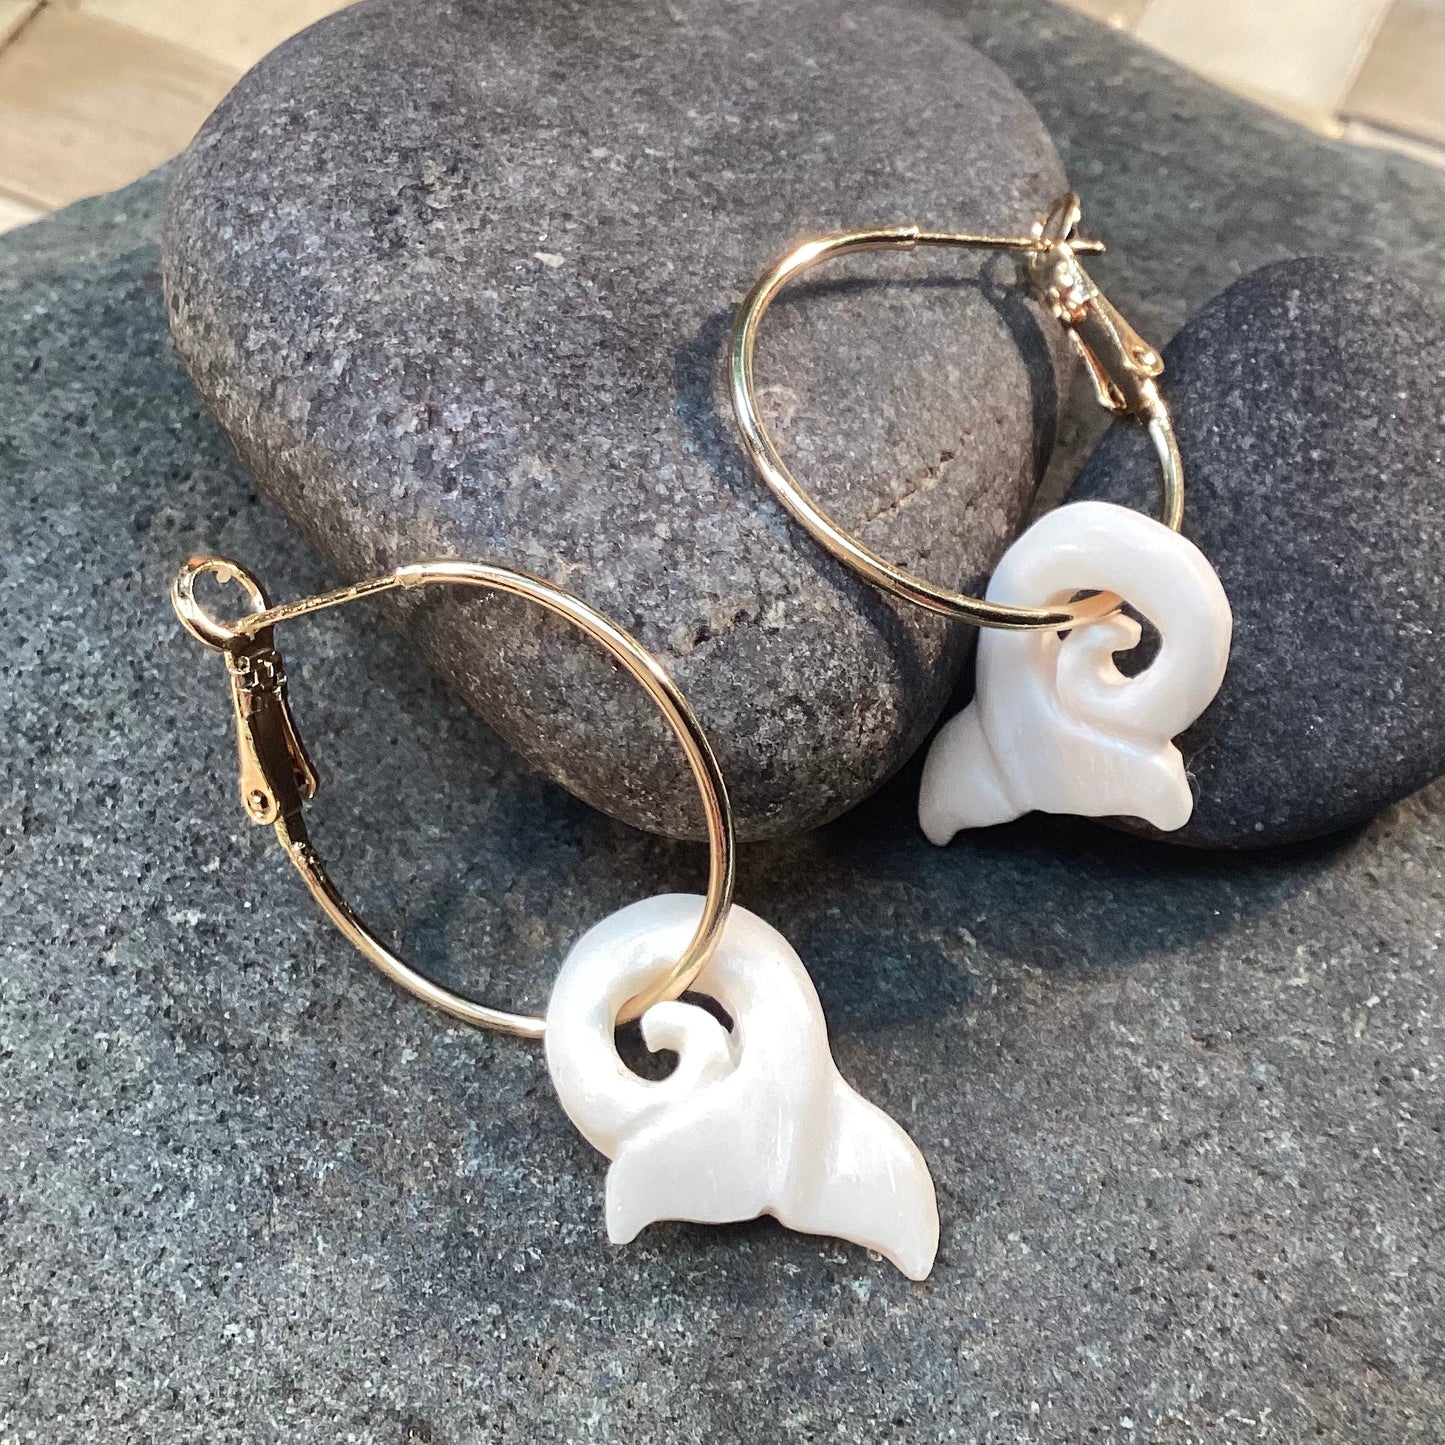 Hoop earrings with whale tail charm. 22k gold stainless and carved bone.